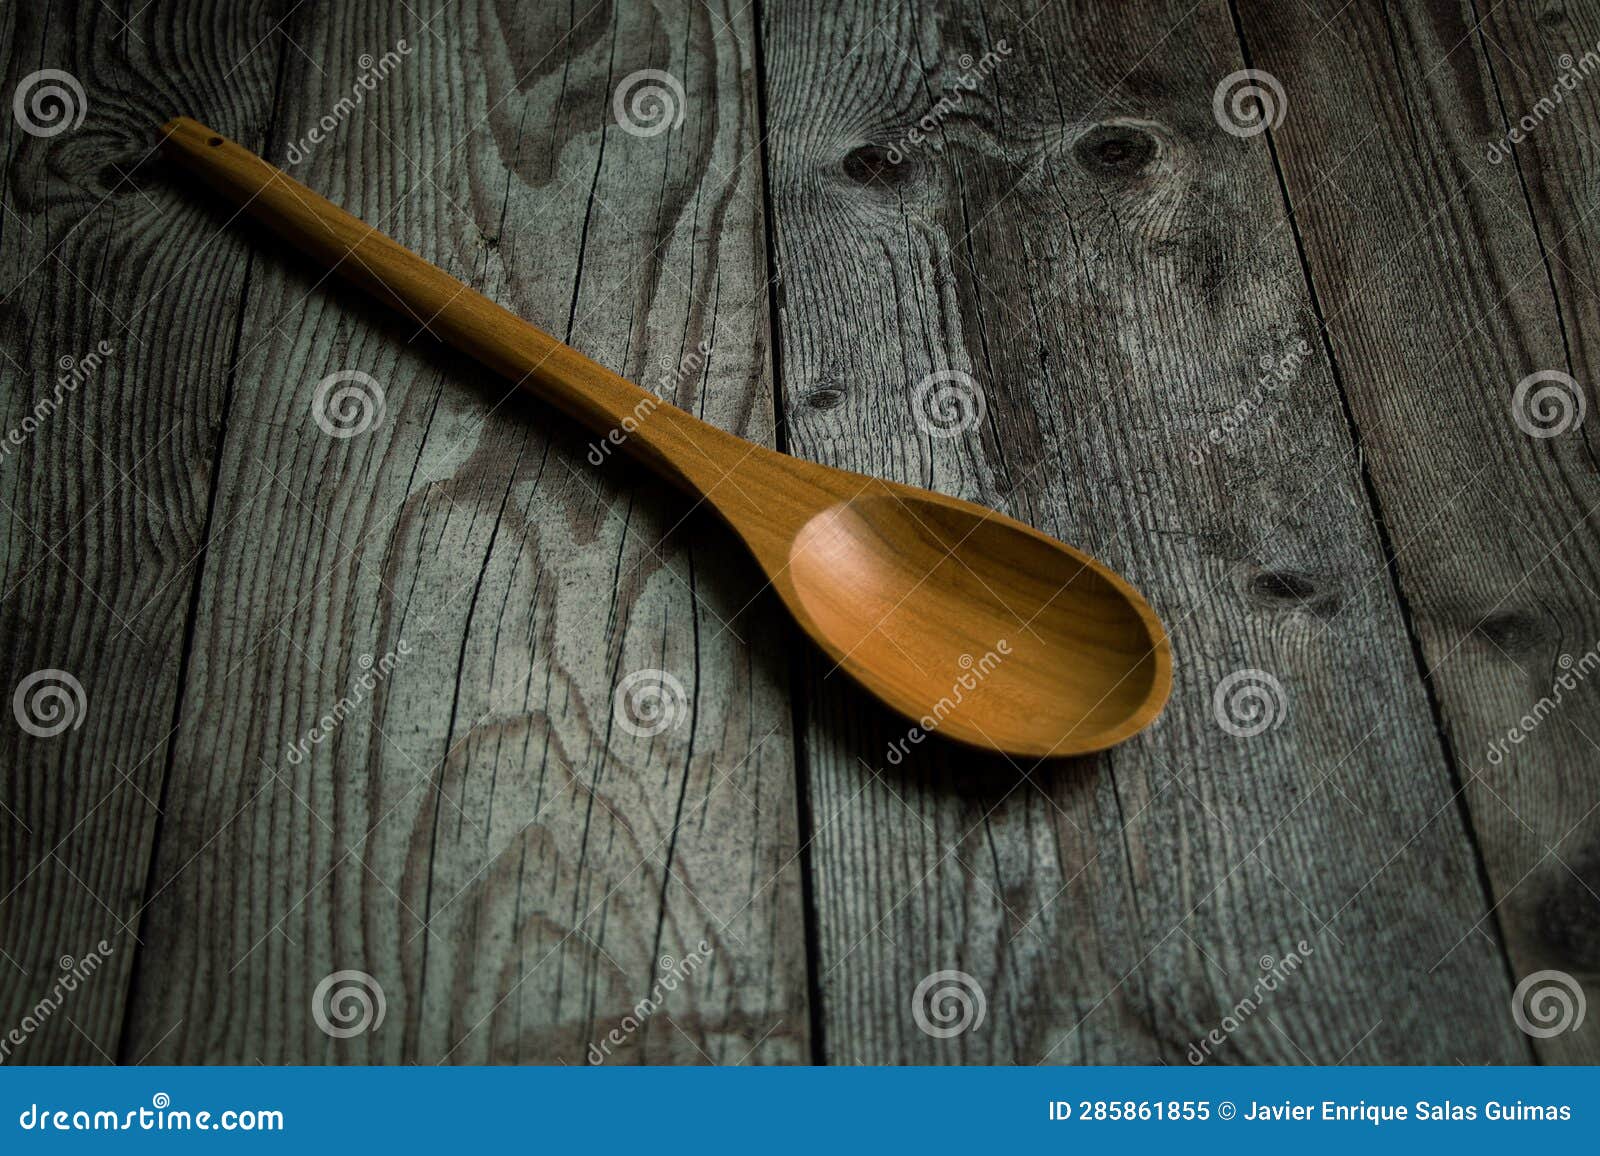 wooden spoon on a rustic table